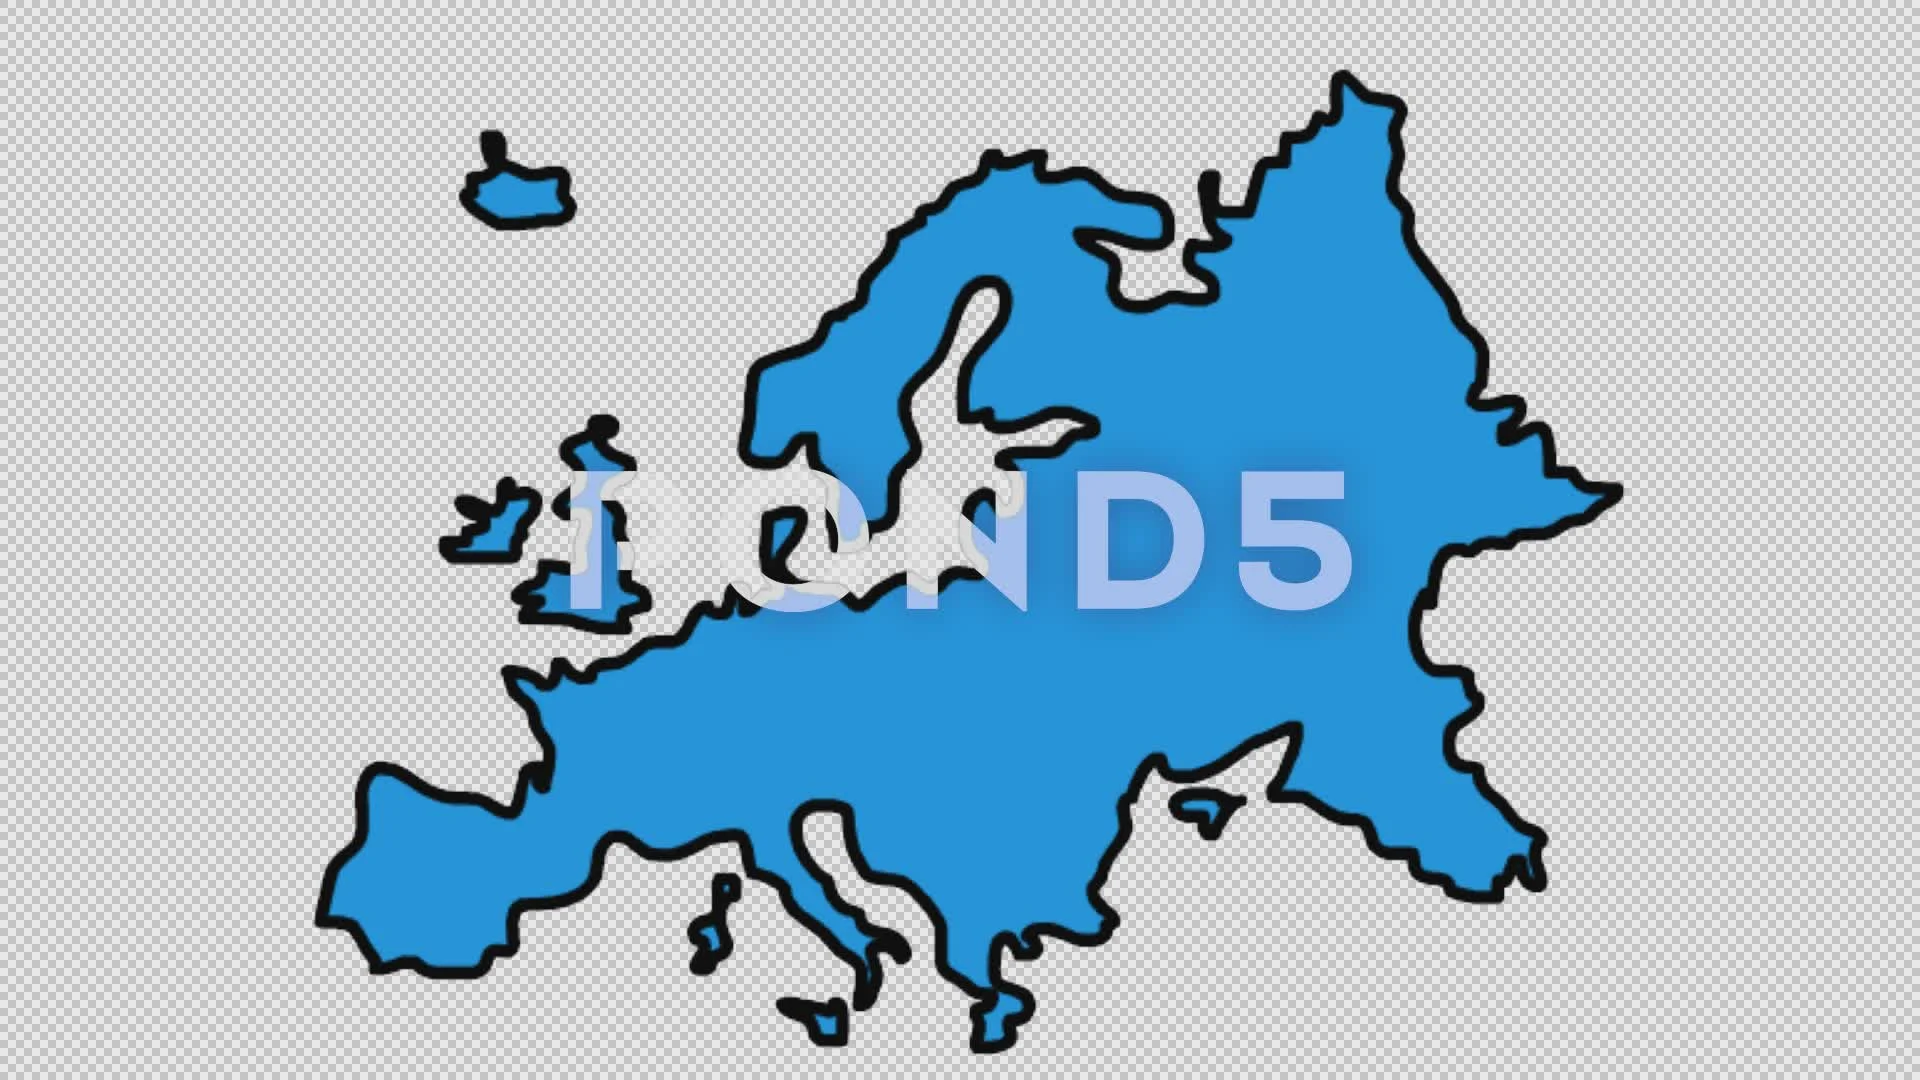 Drawn map europe with country names european Vector Image